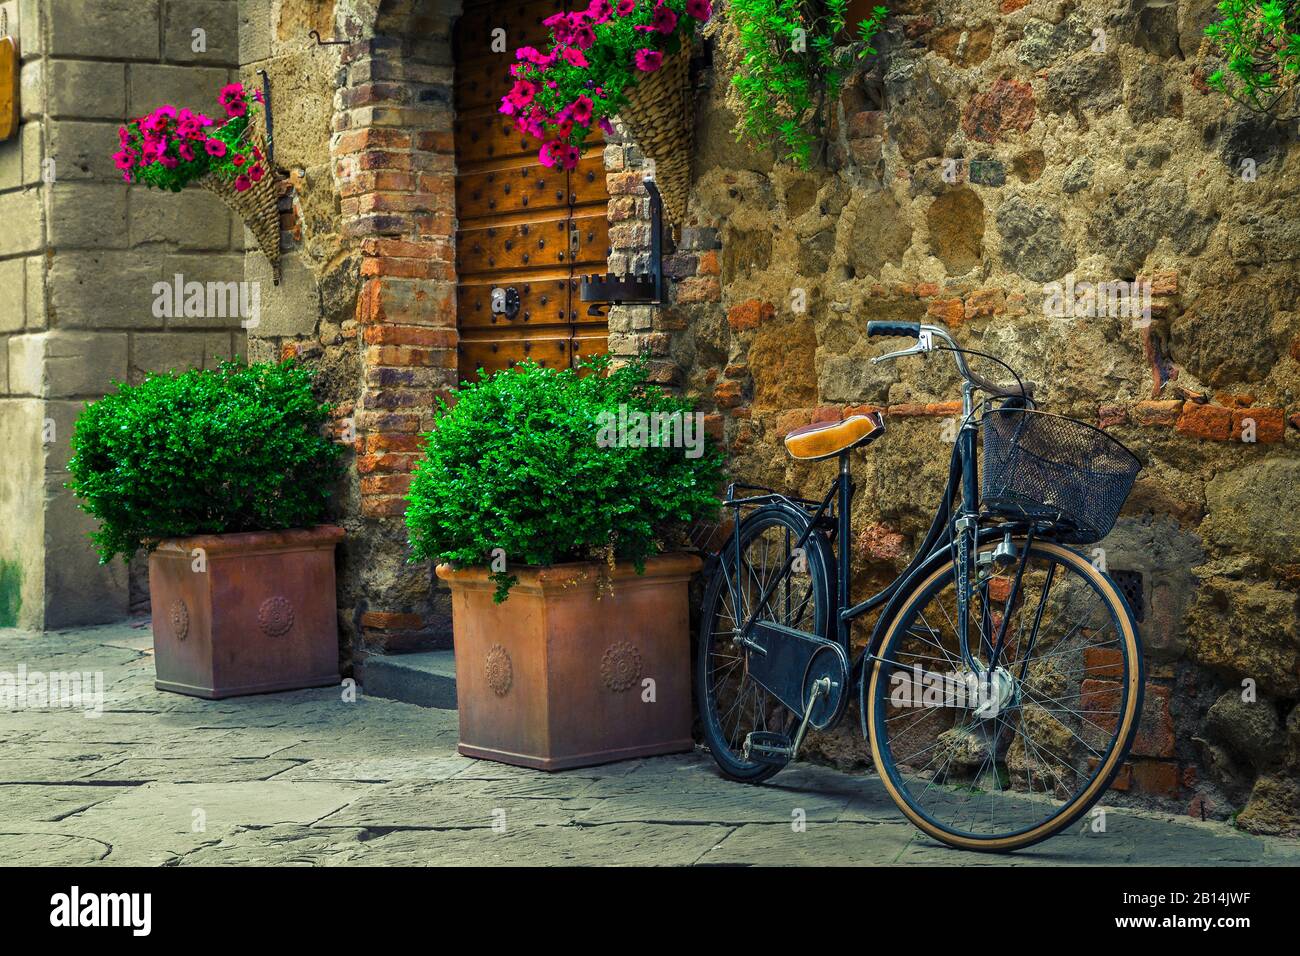 Old fashioned retro bicycle parked in the street. Entrance and wooden door decorated with flowers and flowerpots, Pienza, Tuscany, Italy, Europe Stock Photo